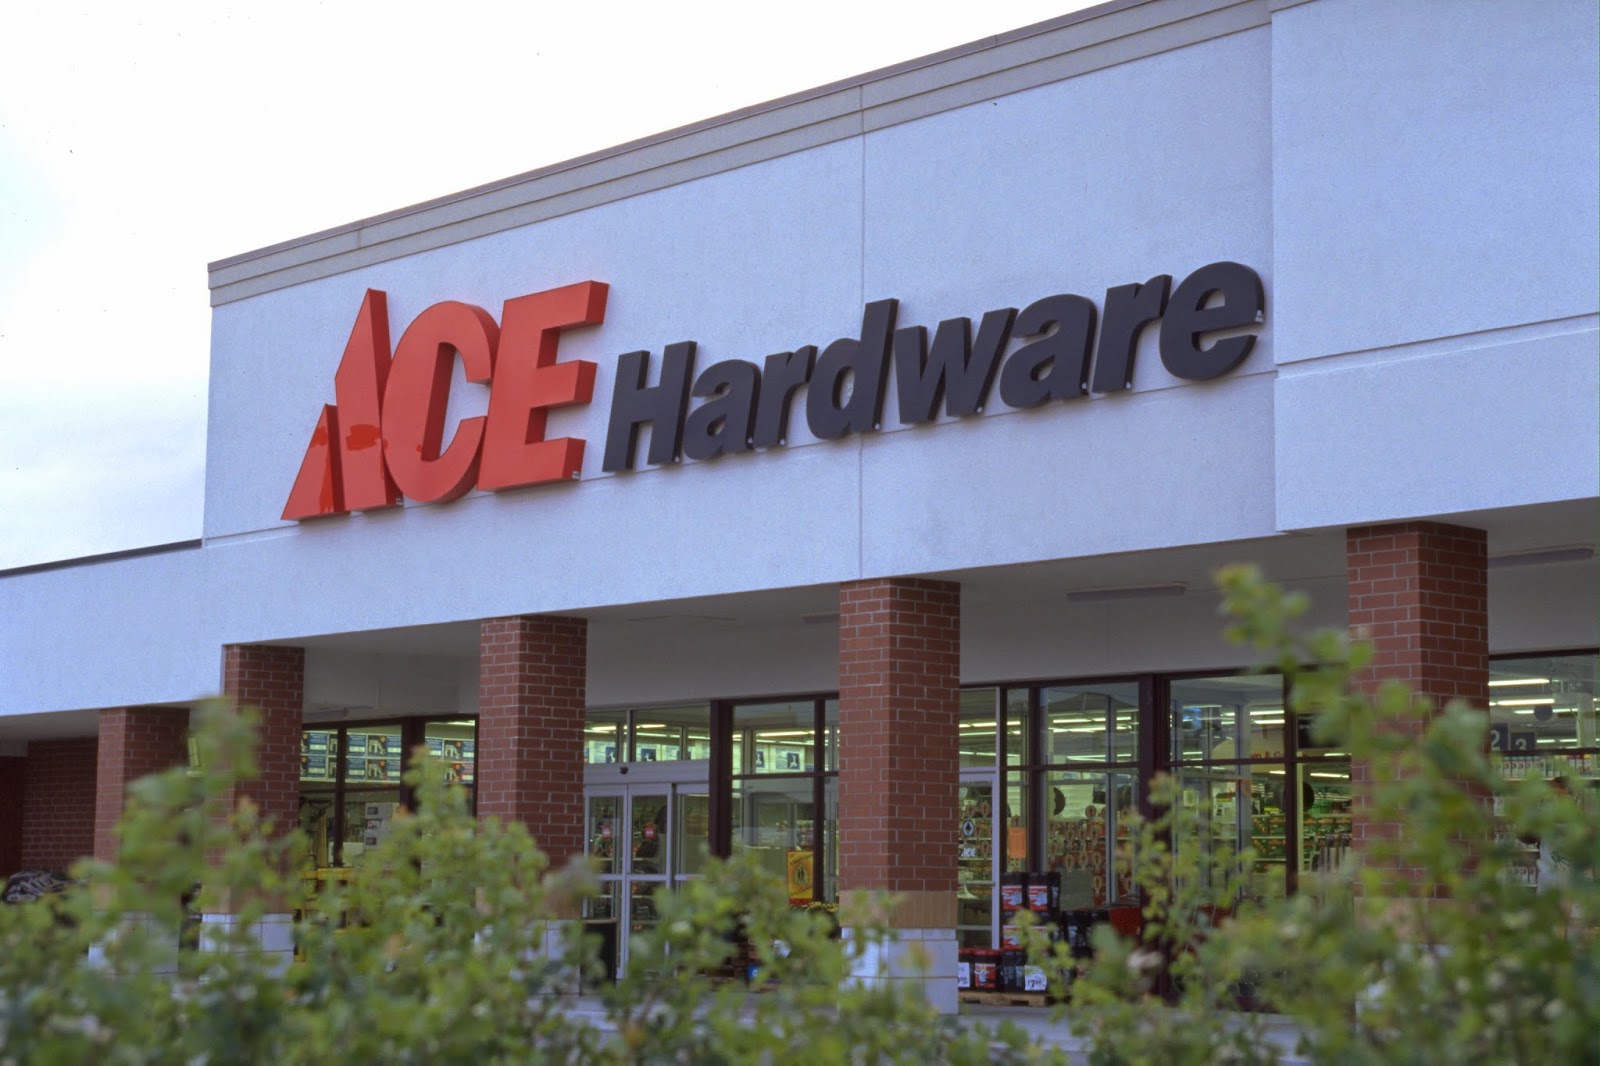 printable-coupons-in-store-coupon-codes-ace-hardware-coupons